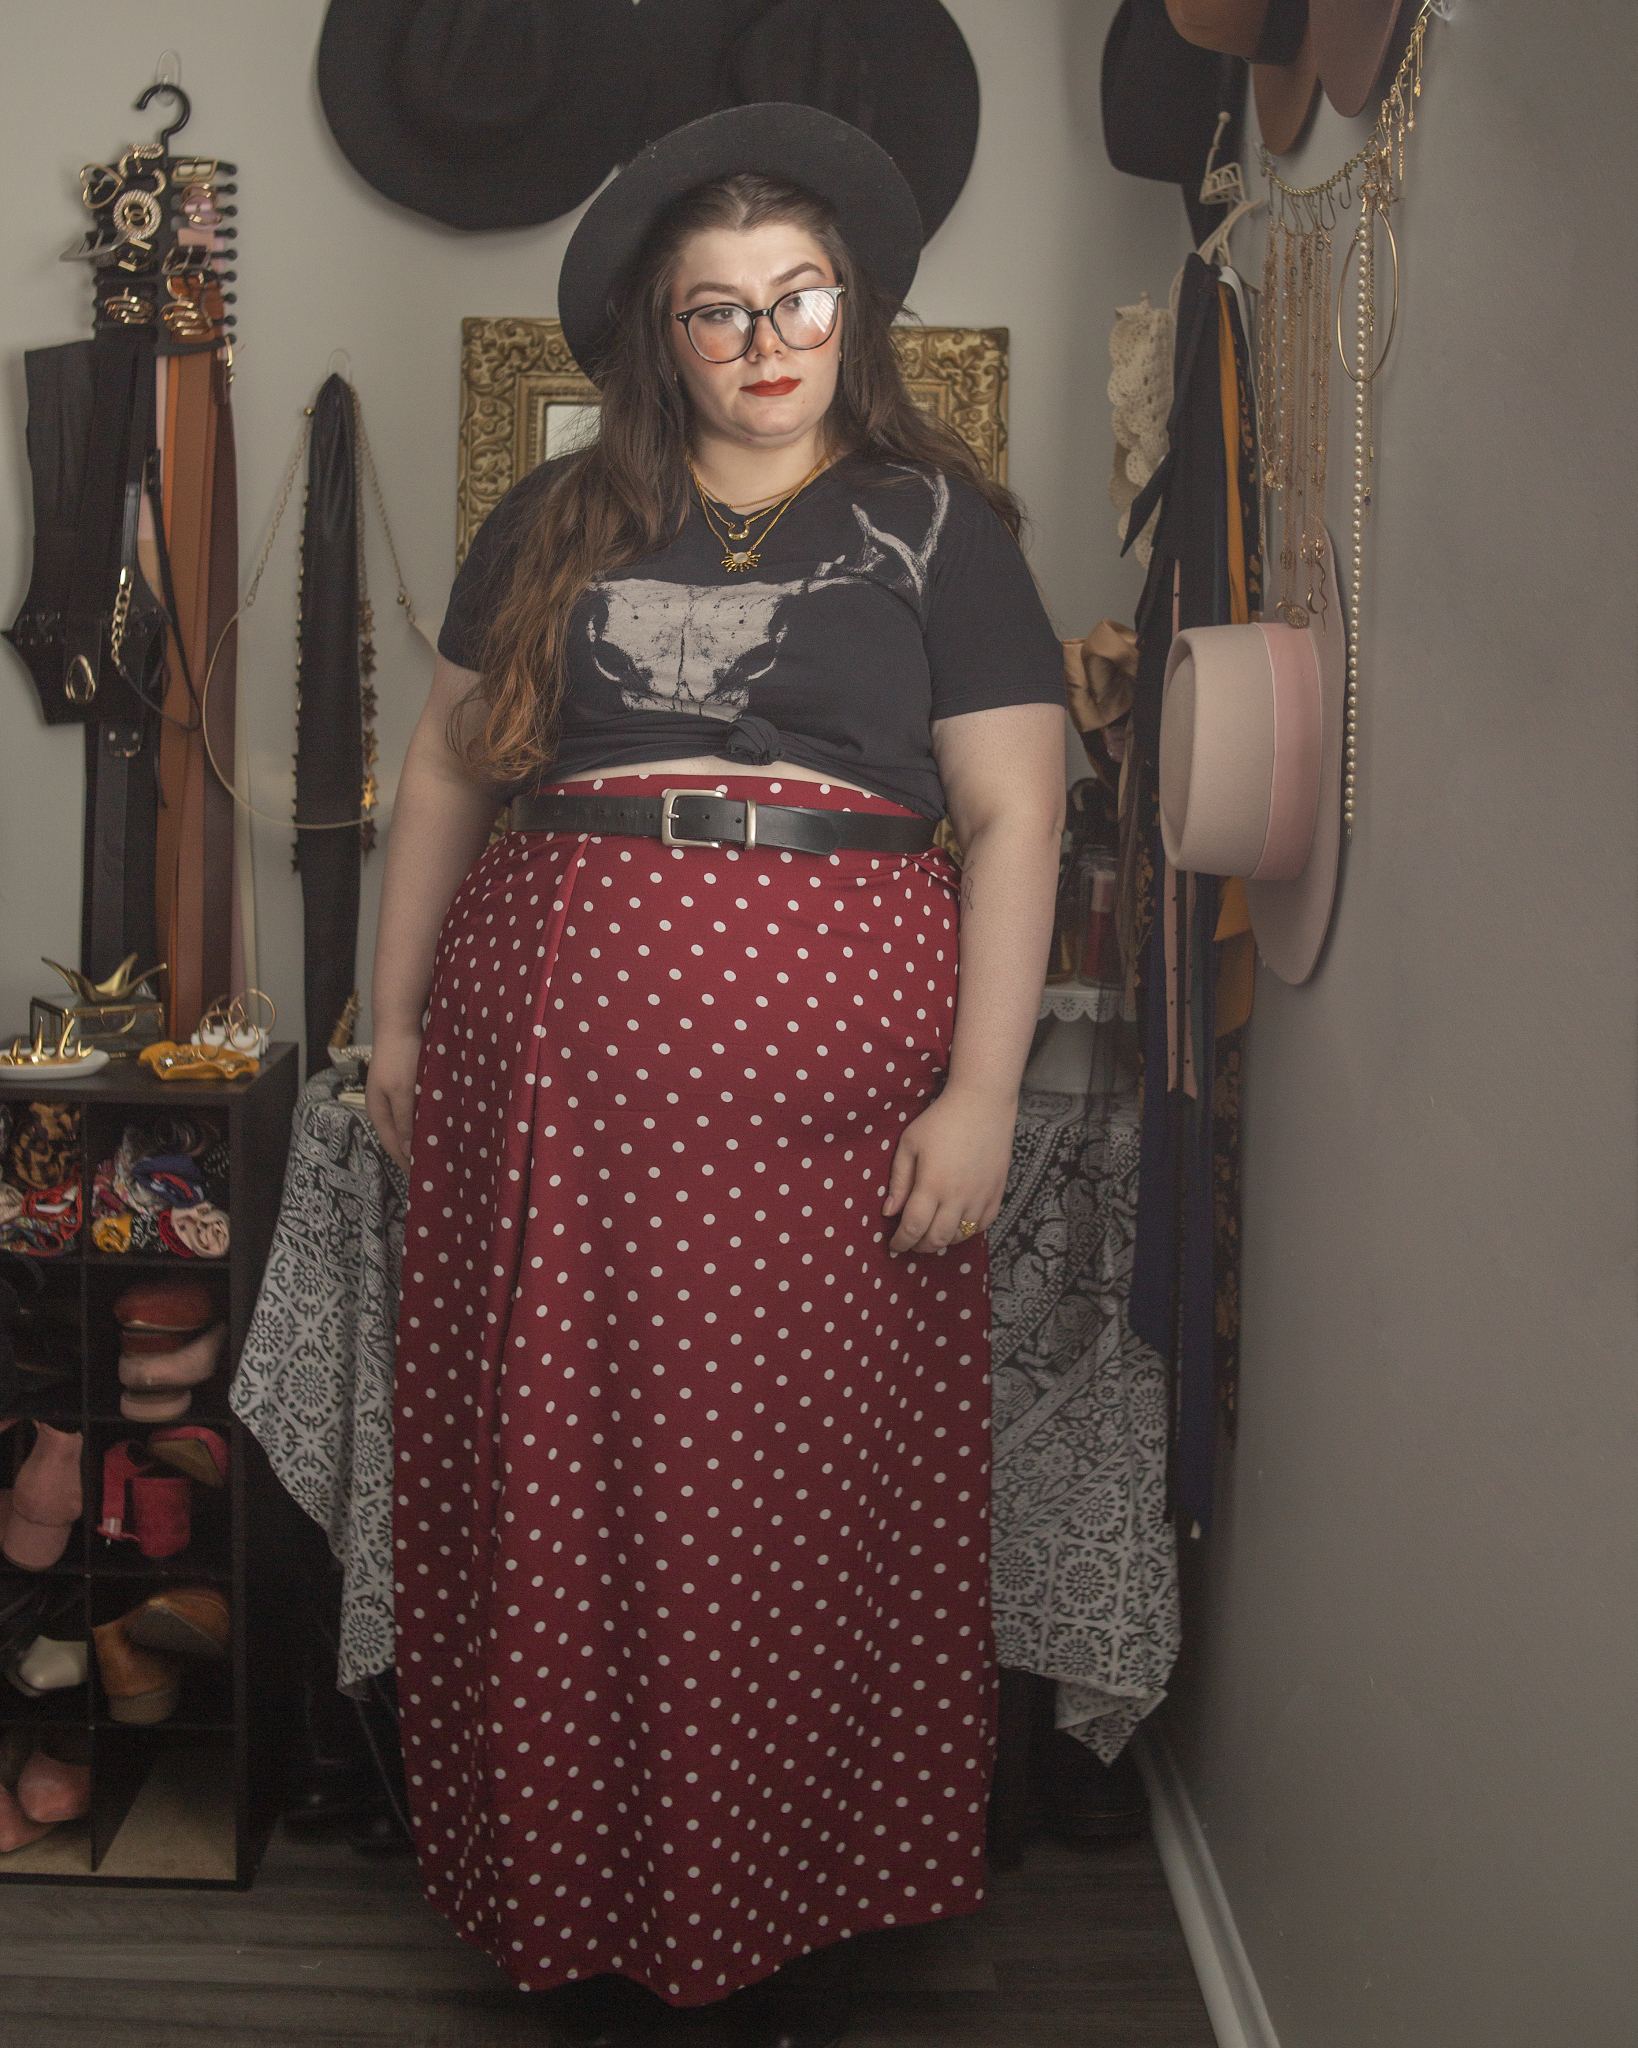 An outfit consisting of a black v-neck t-shirt with a bone colored deer skull motif, tied in a knot, with a white on maroon red large polka dot midi skirt with a high slit, and heels.